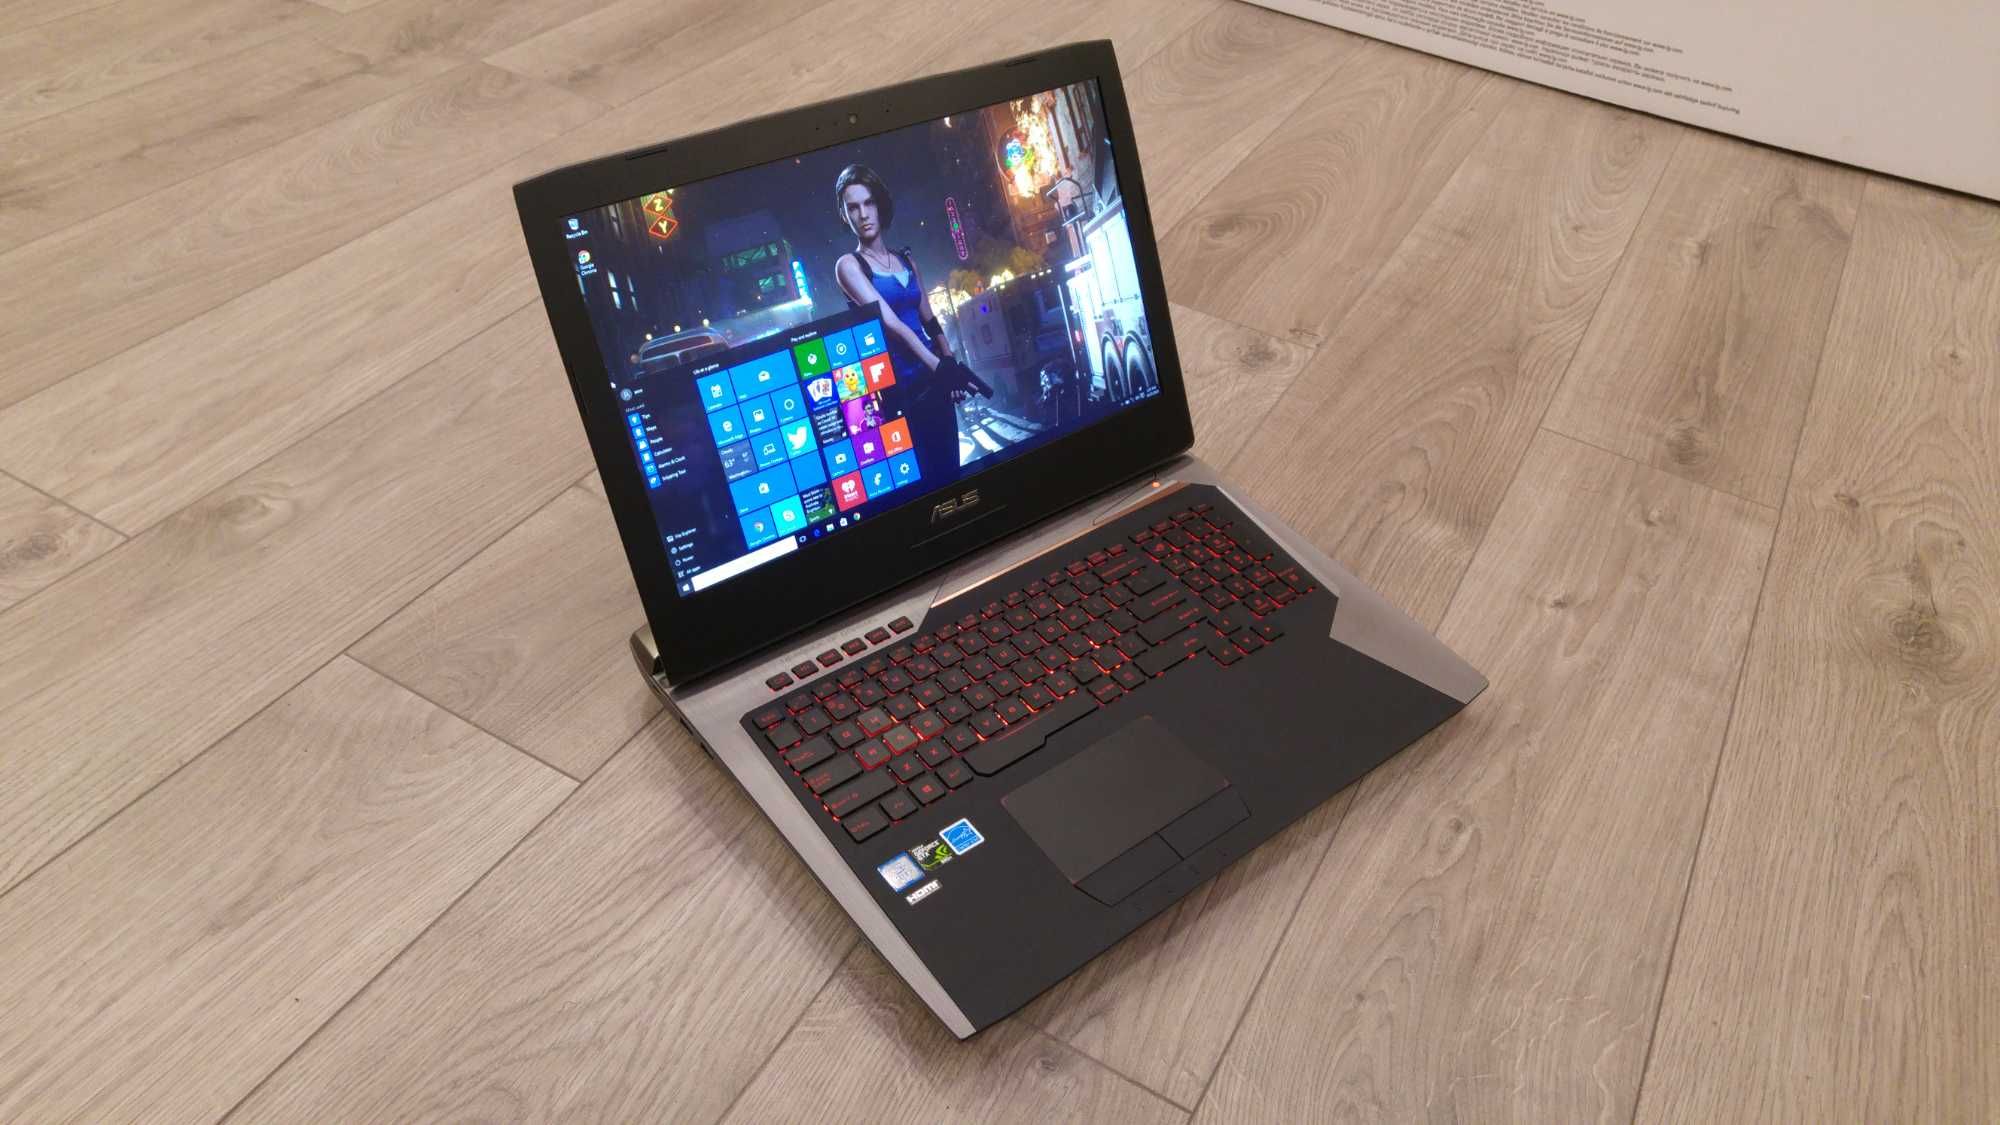 laptop Asus Republic of Gamers, intel core i7- video 8 gb , 17,3 inch